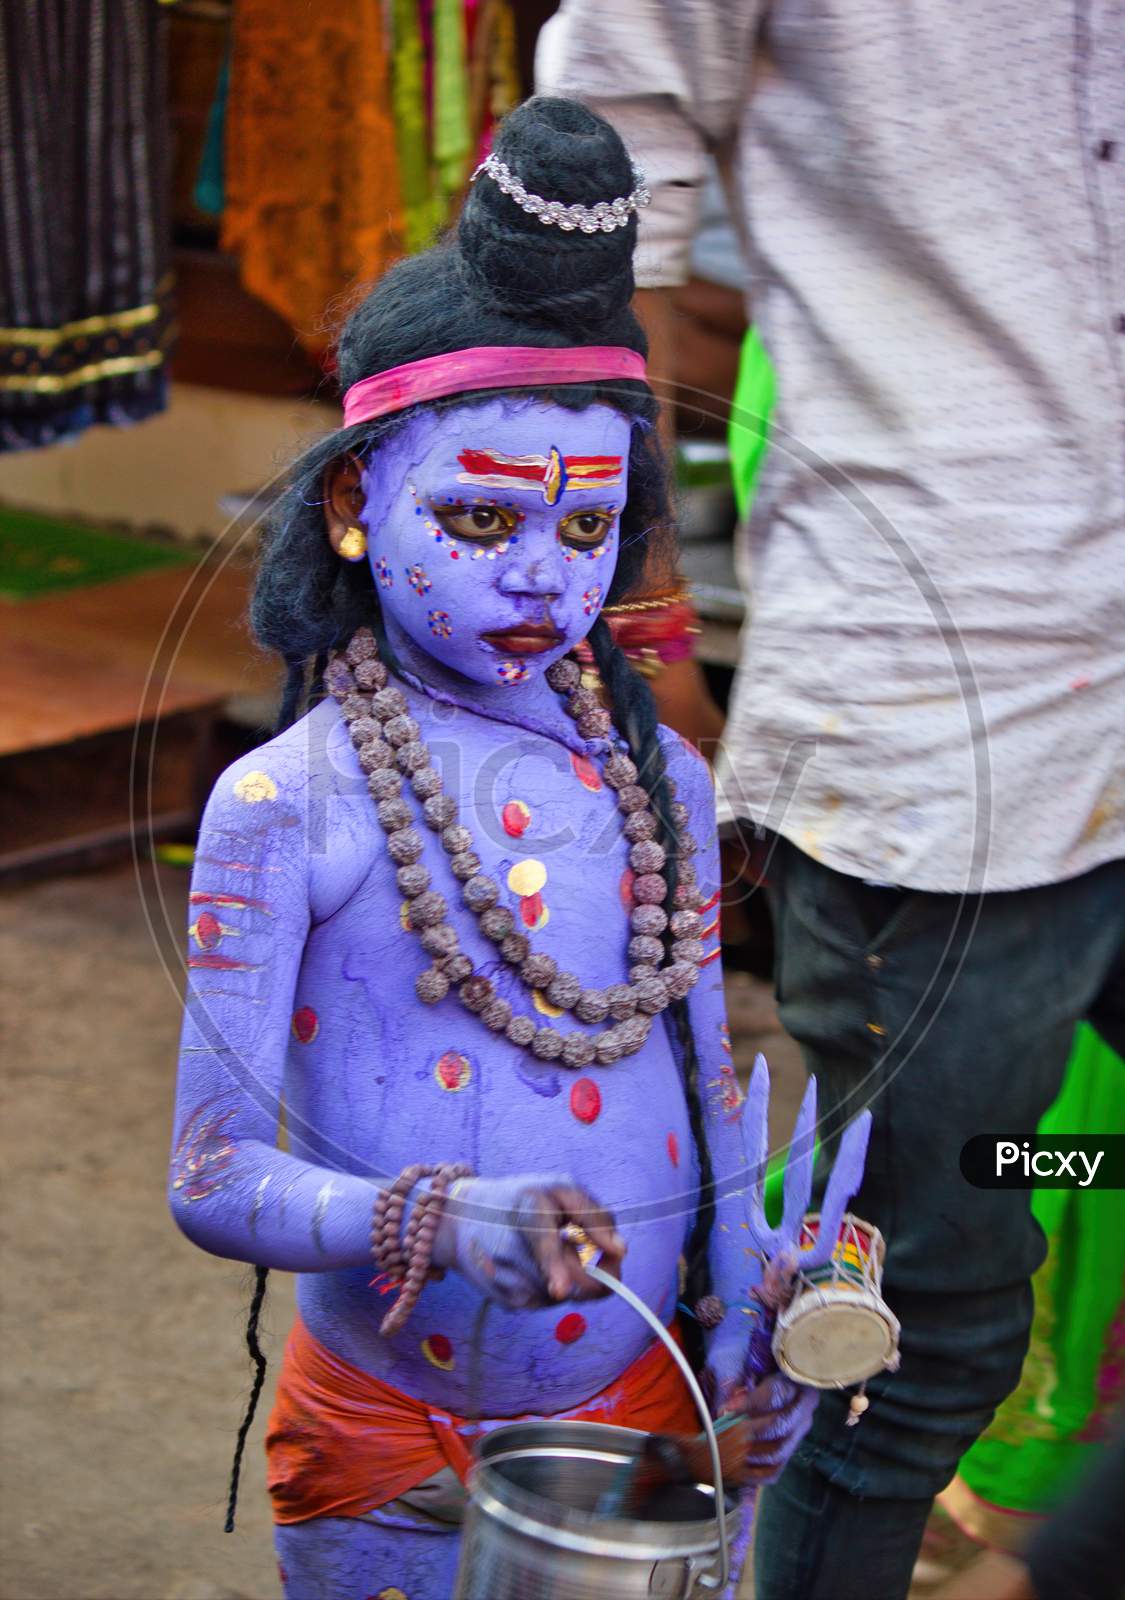 Pushkar, India - November 10, 2016: An Unidentified Boy Dressed And Disguised As Hindu Lord Shiva With Blue Paint Attends The Pushkar Cattle Fair In The State Of Rajasthan